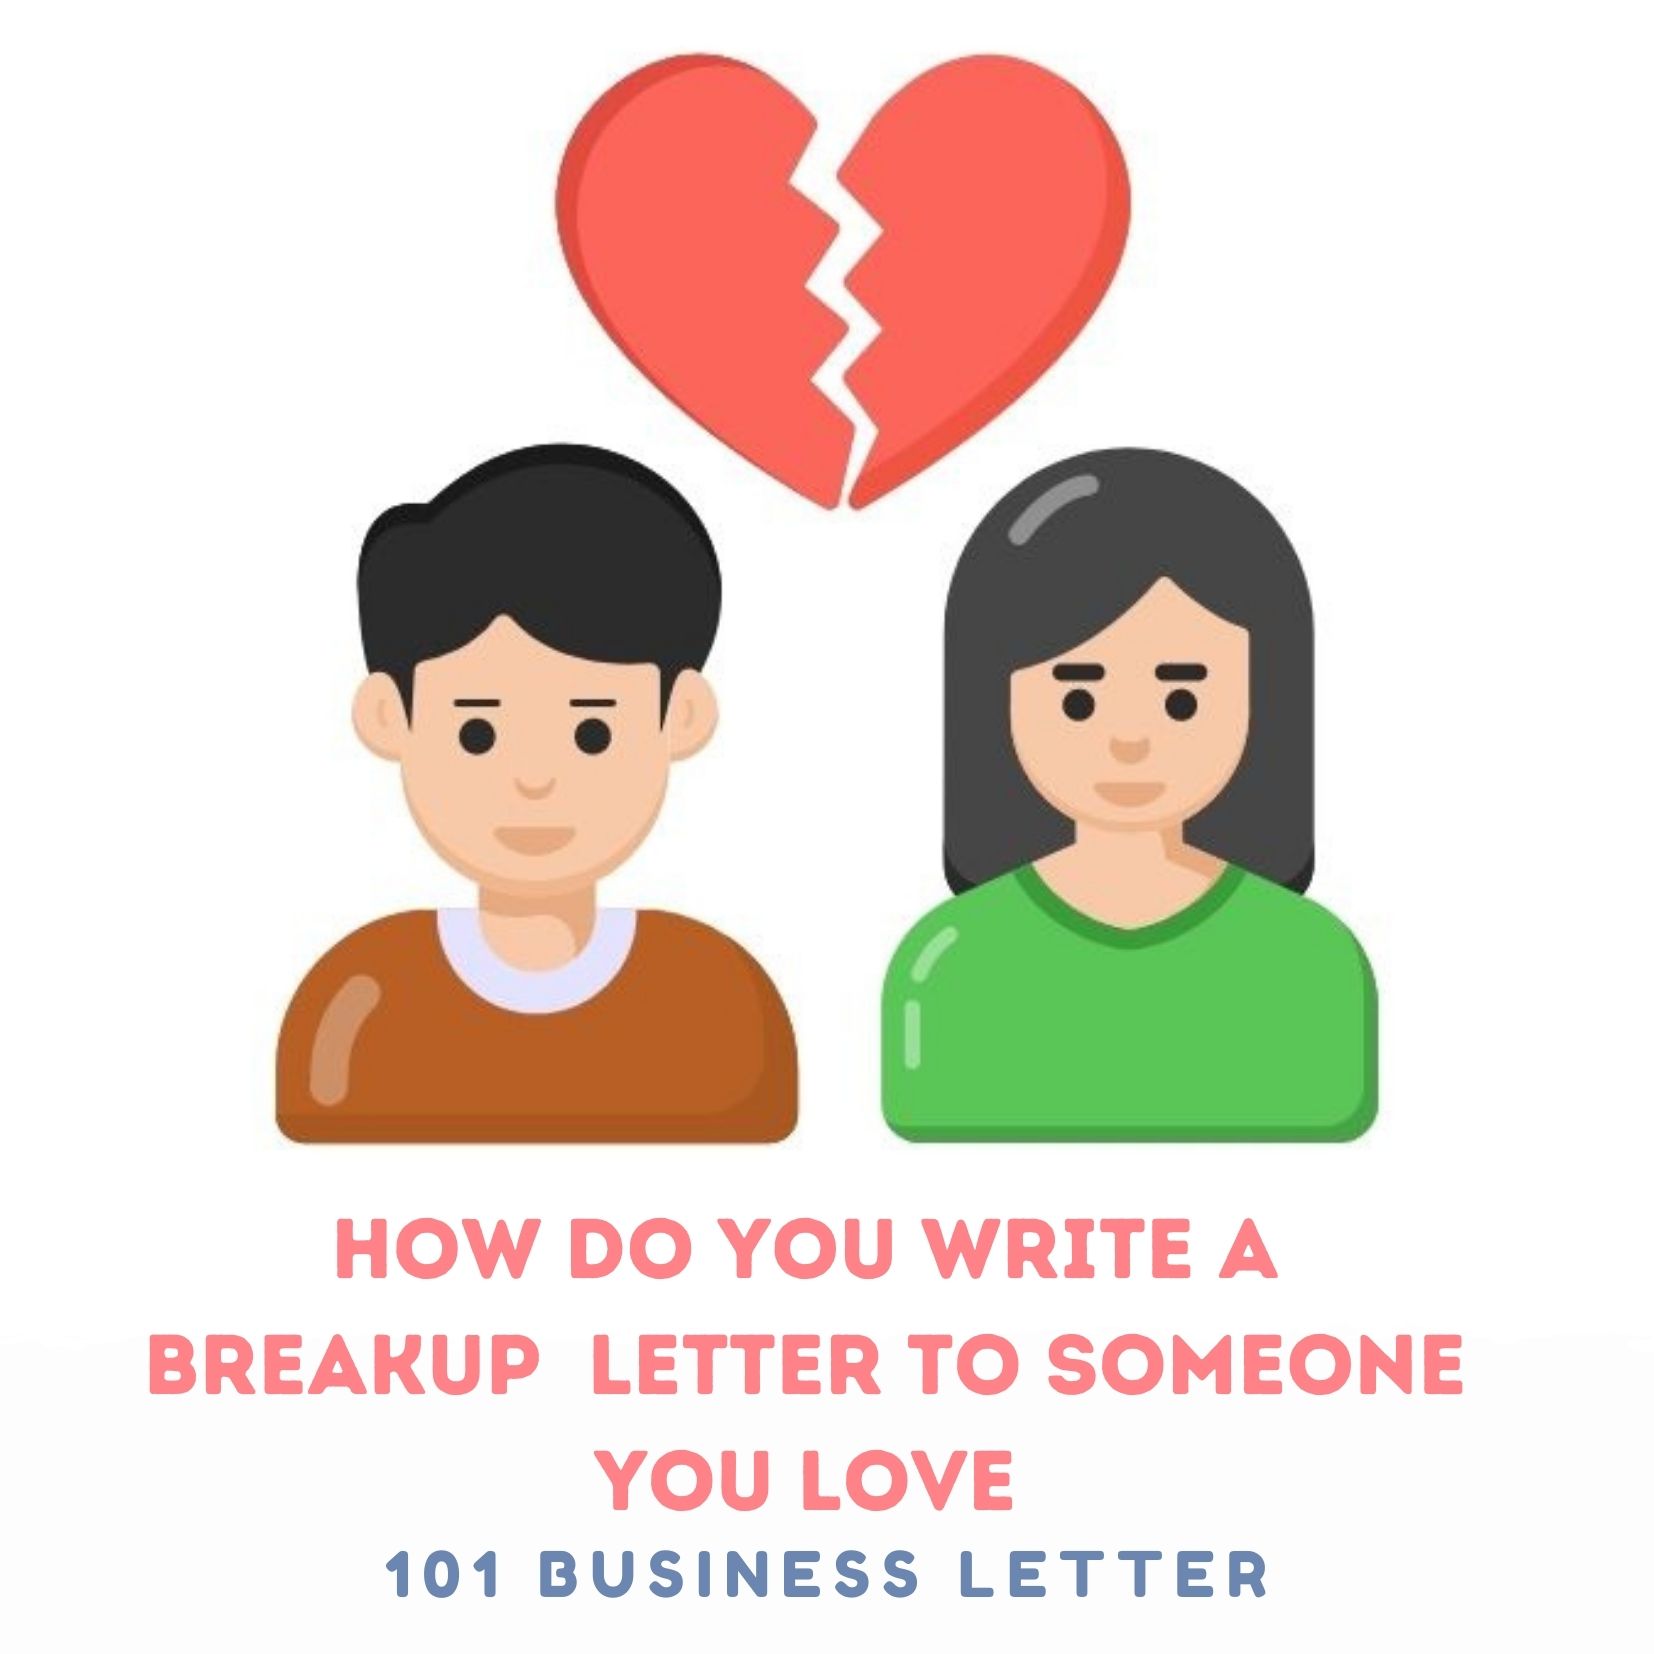 how-do-you-write-a-breakup-letter-to-someone-you-love